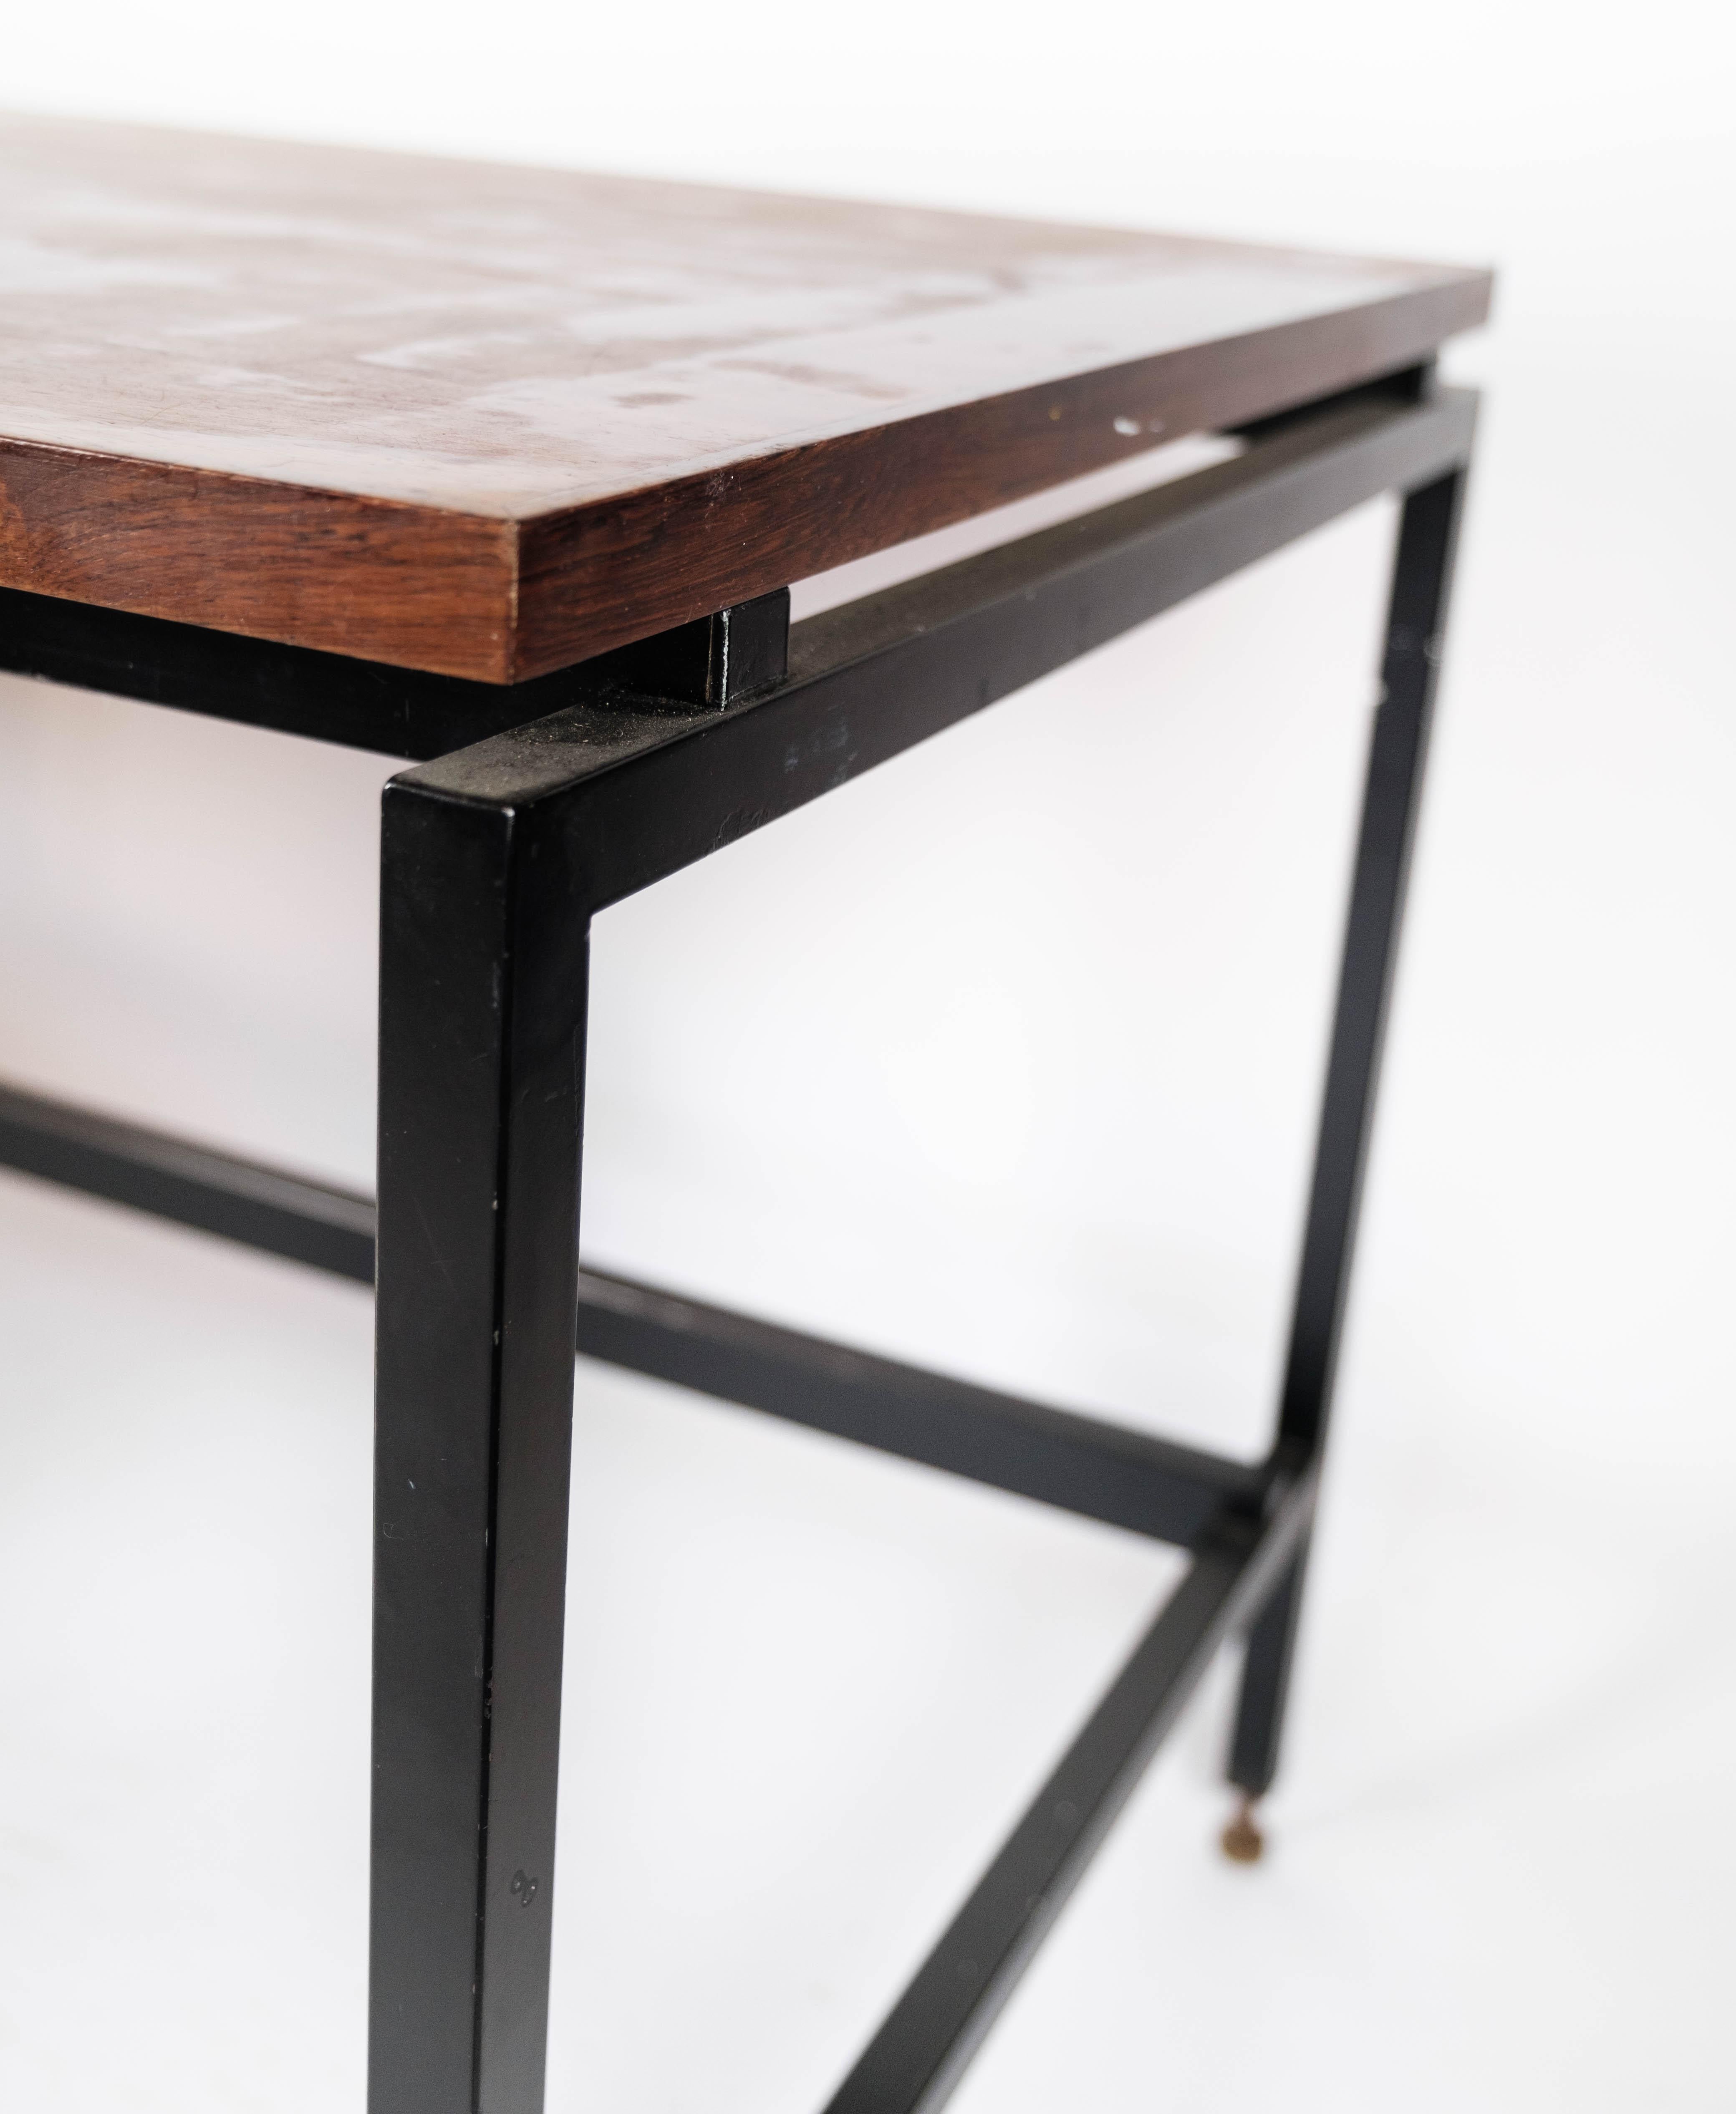 Desk in Rosewood and Legs in Metal, of Danish Design, 1960s For Sale 3